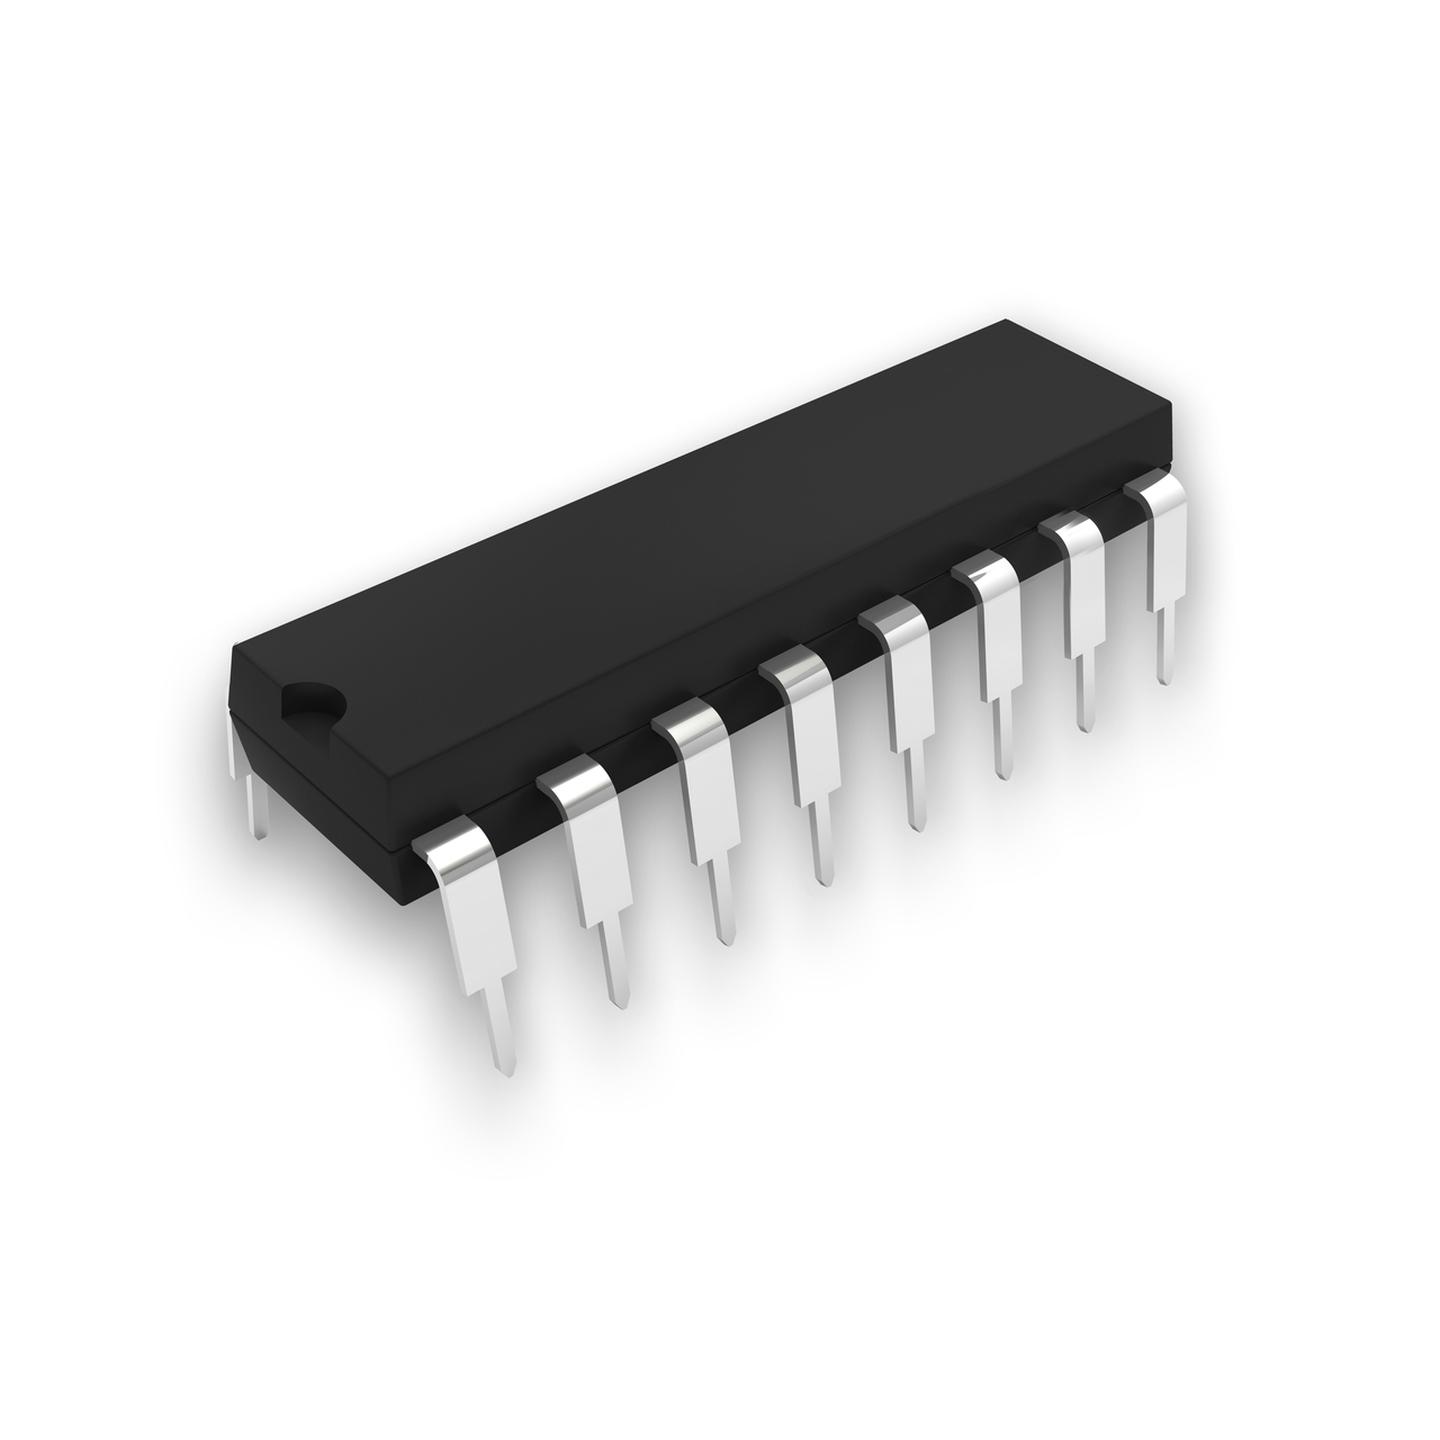 74LS192 Up/Down Decade Counter IC